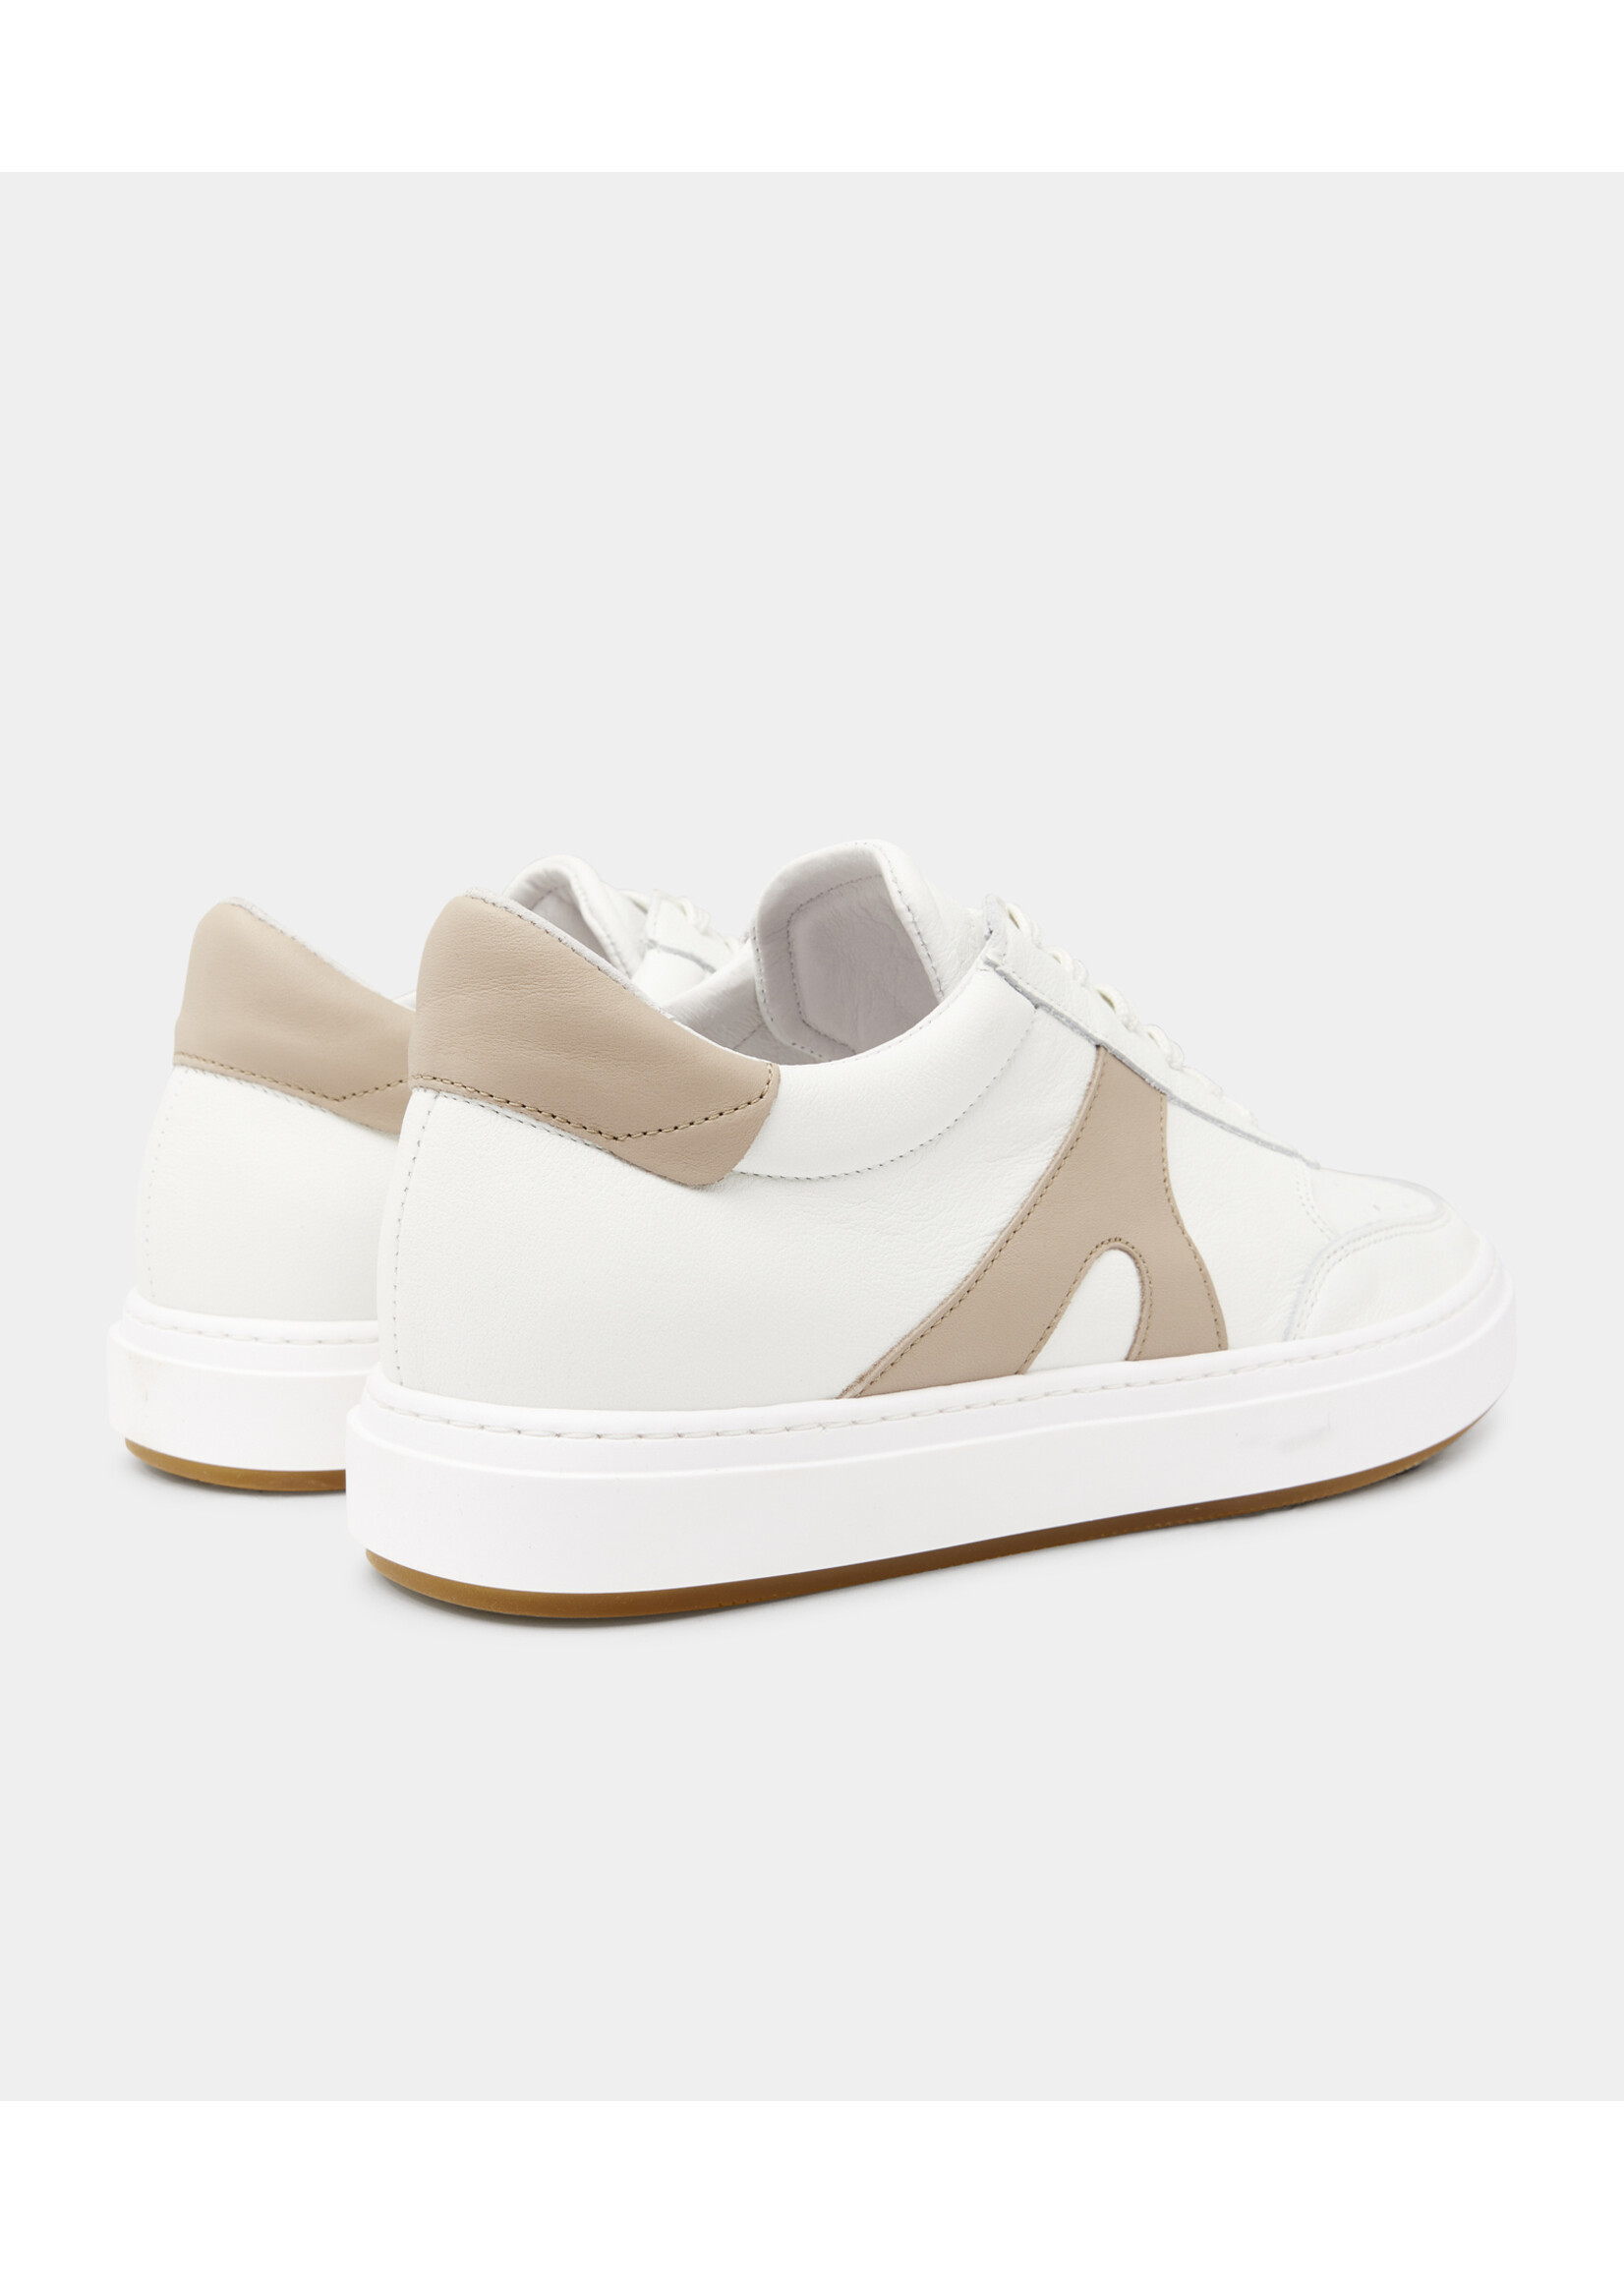 Garment Project Legend - White/Earth Leather